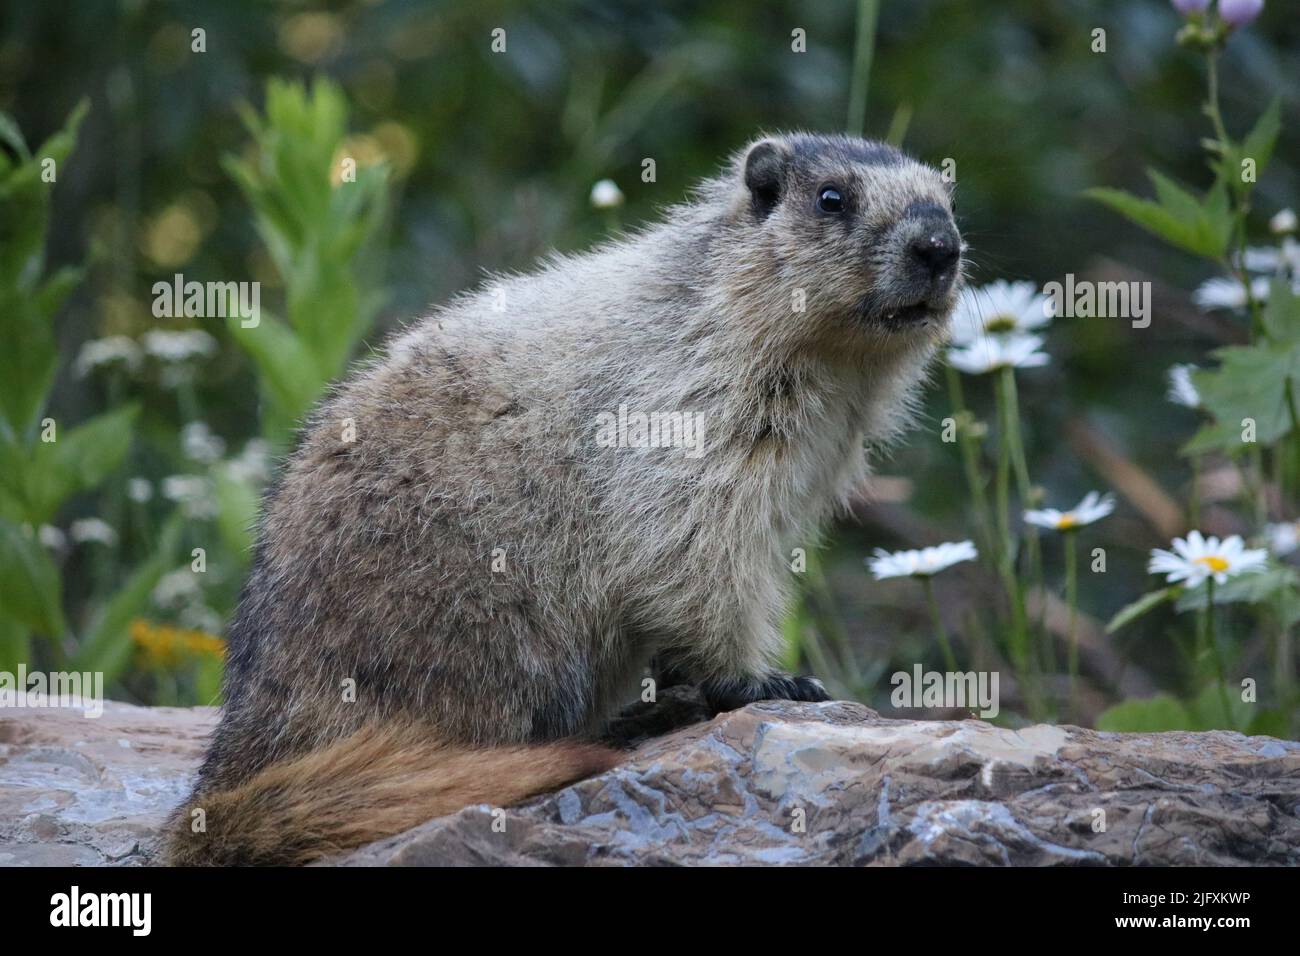 What have you been eating -Hoary marmot (Rodentia Sciuridae Marmota caligata)? Wash your face before perching on a rock wall posing by daisies! Stock Photo